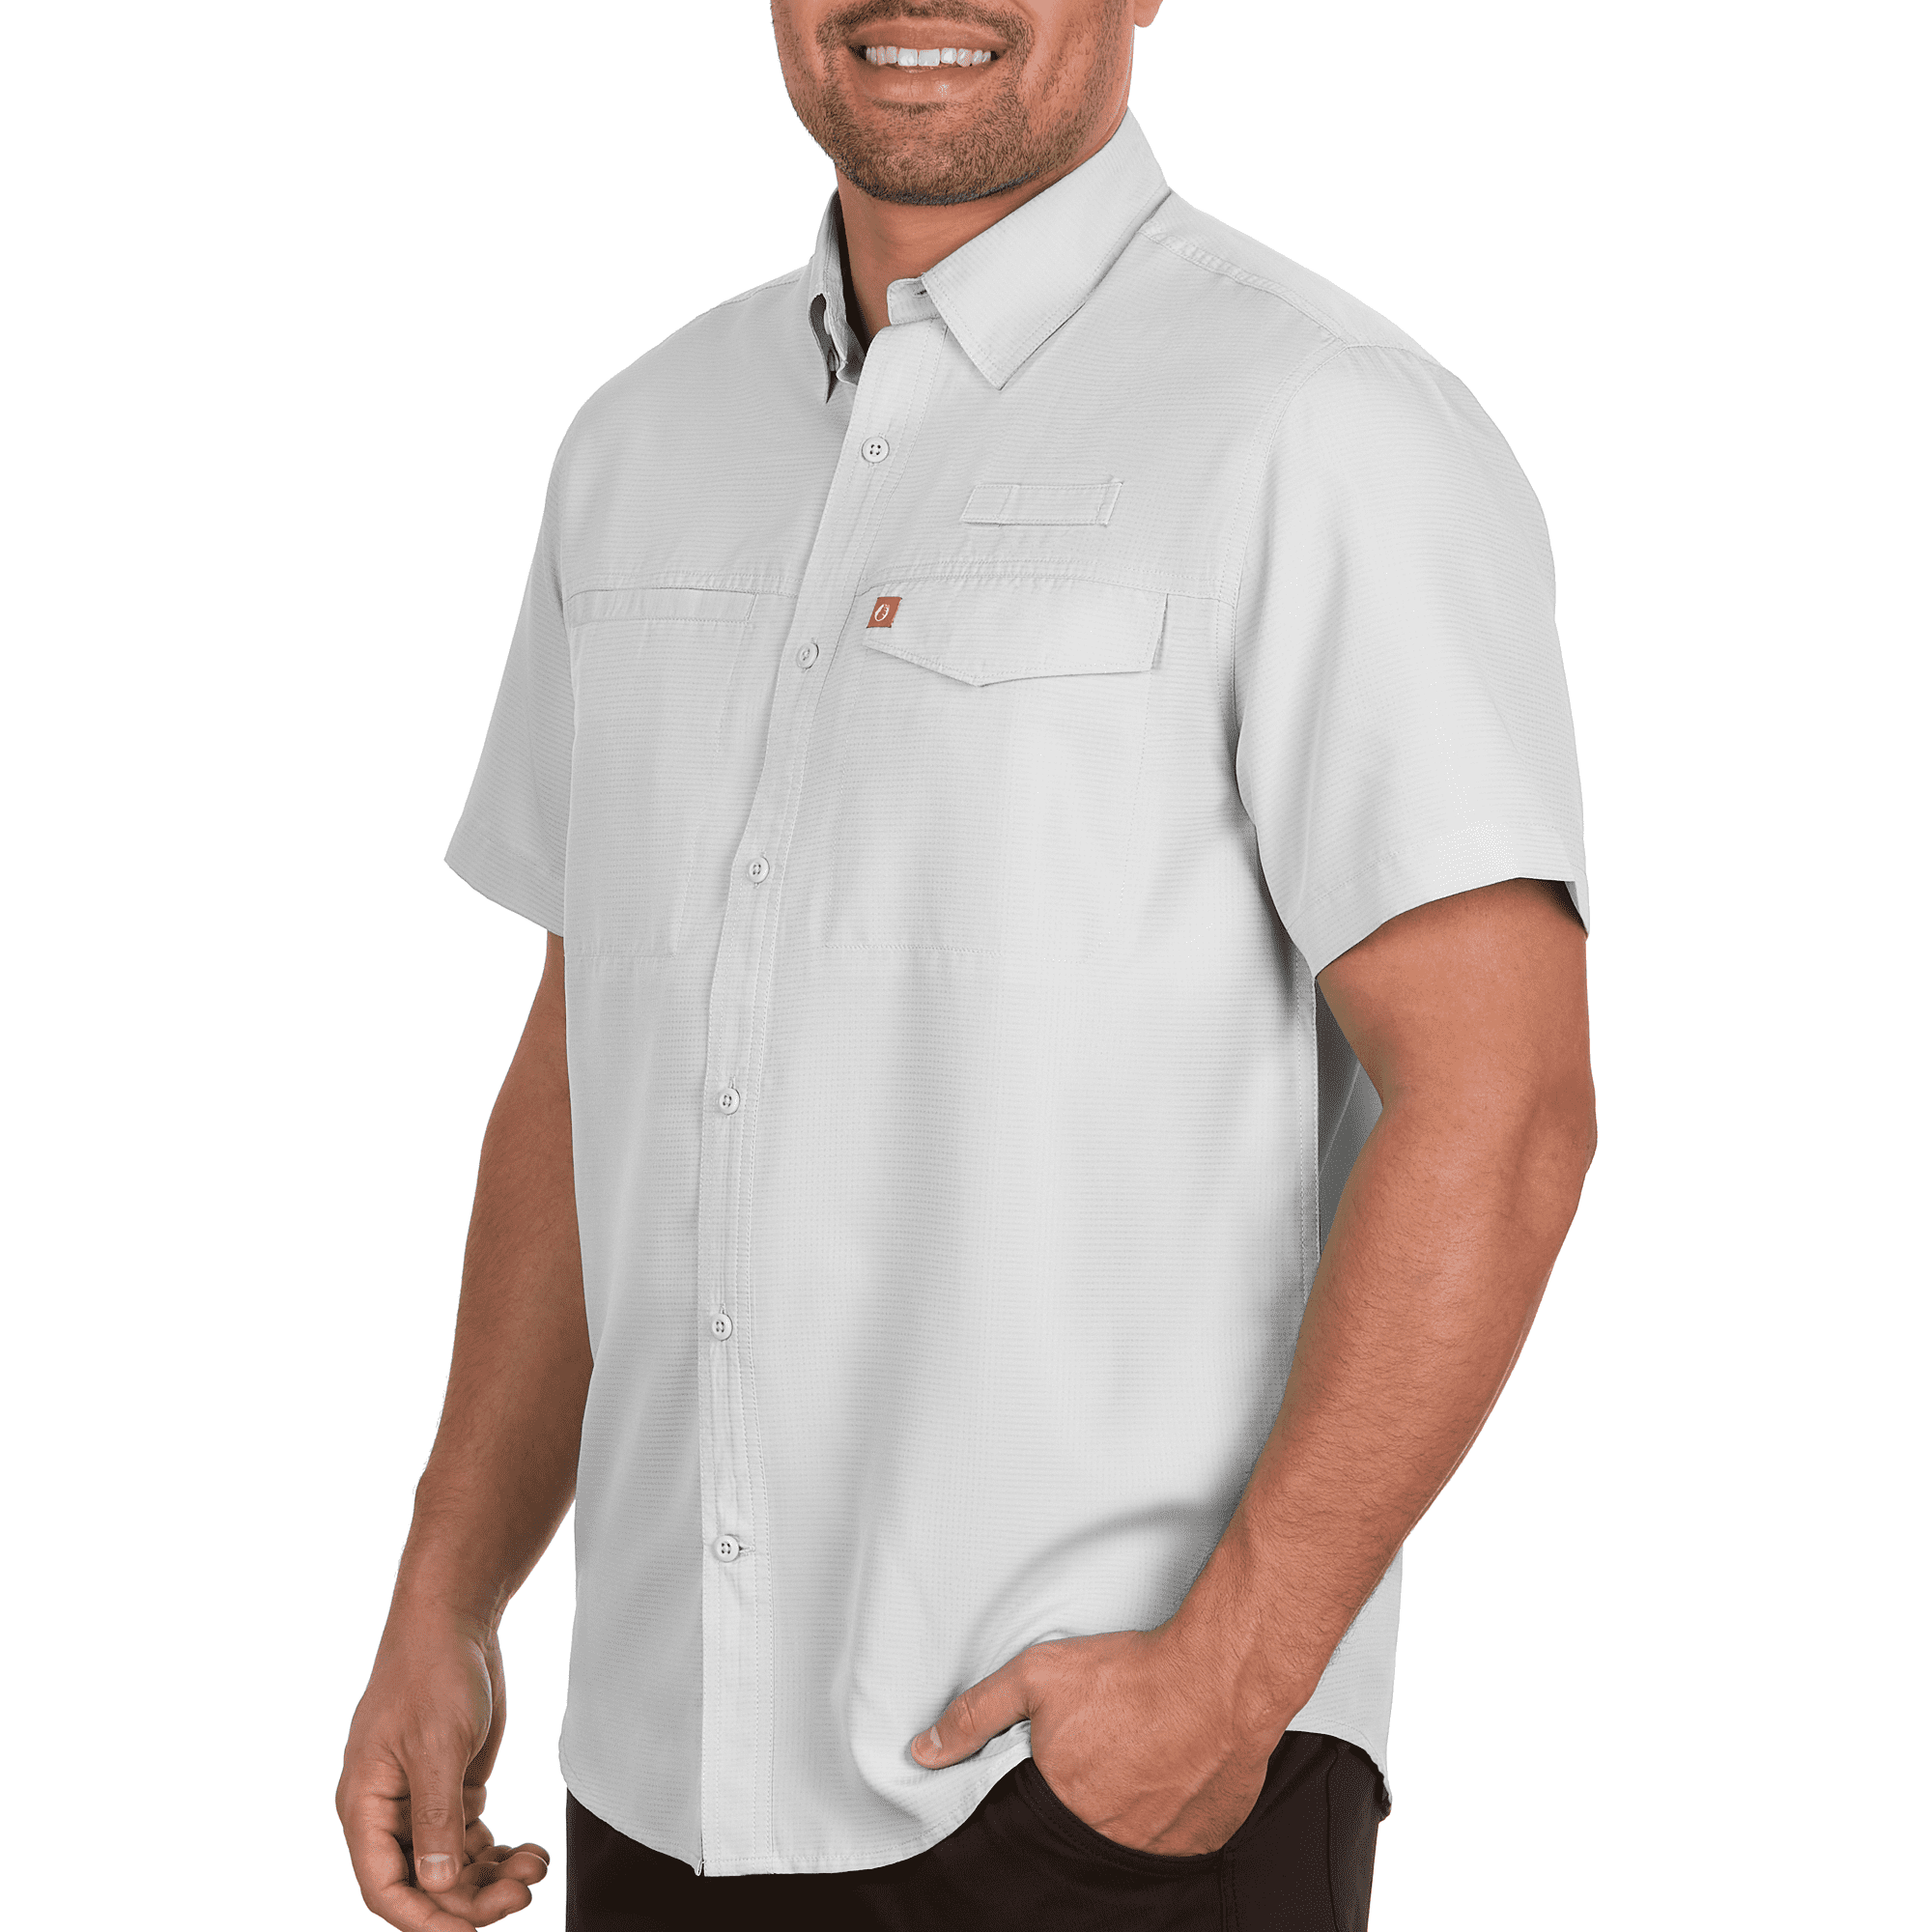 The American Outdoorsman Poly Grid Fishing Short Sleeve Shirt for